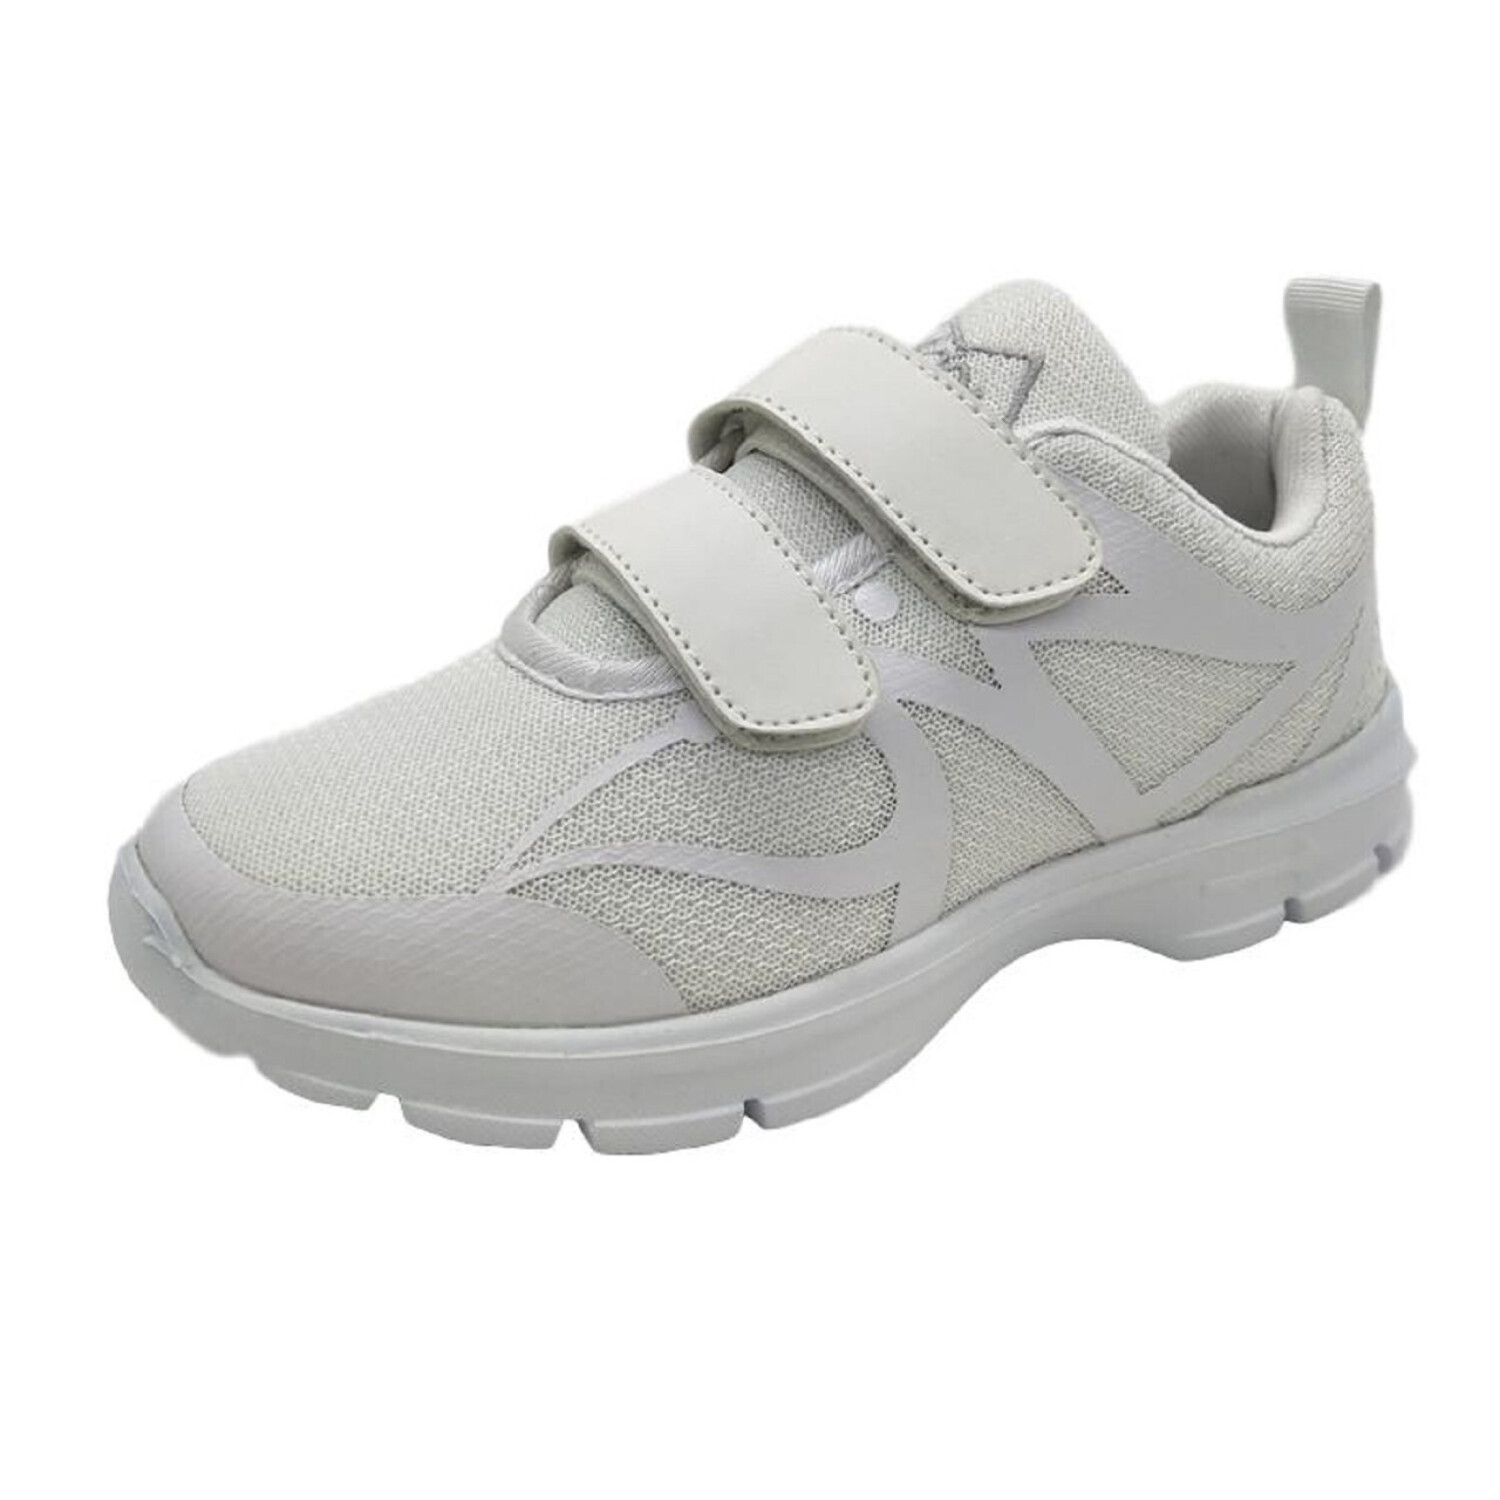 MAIR Mens Ultra-Light Double Hook-and-Loop PACER WHITE Athletic Mesh Sneaker Shoe - image 1 of 5